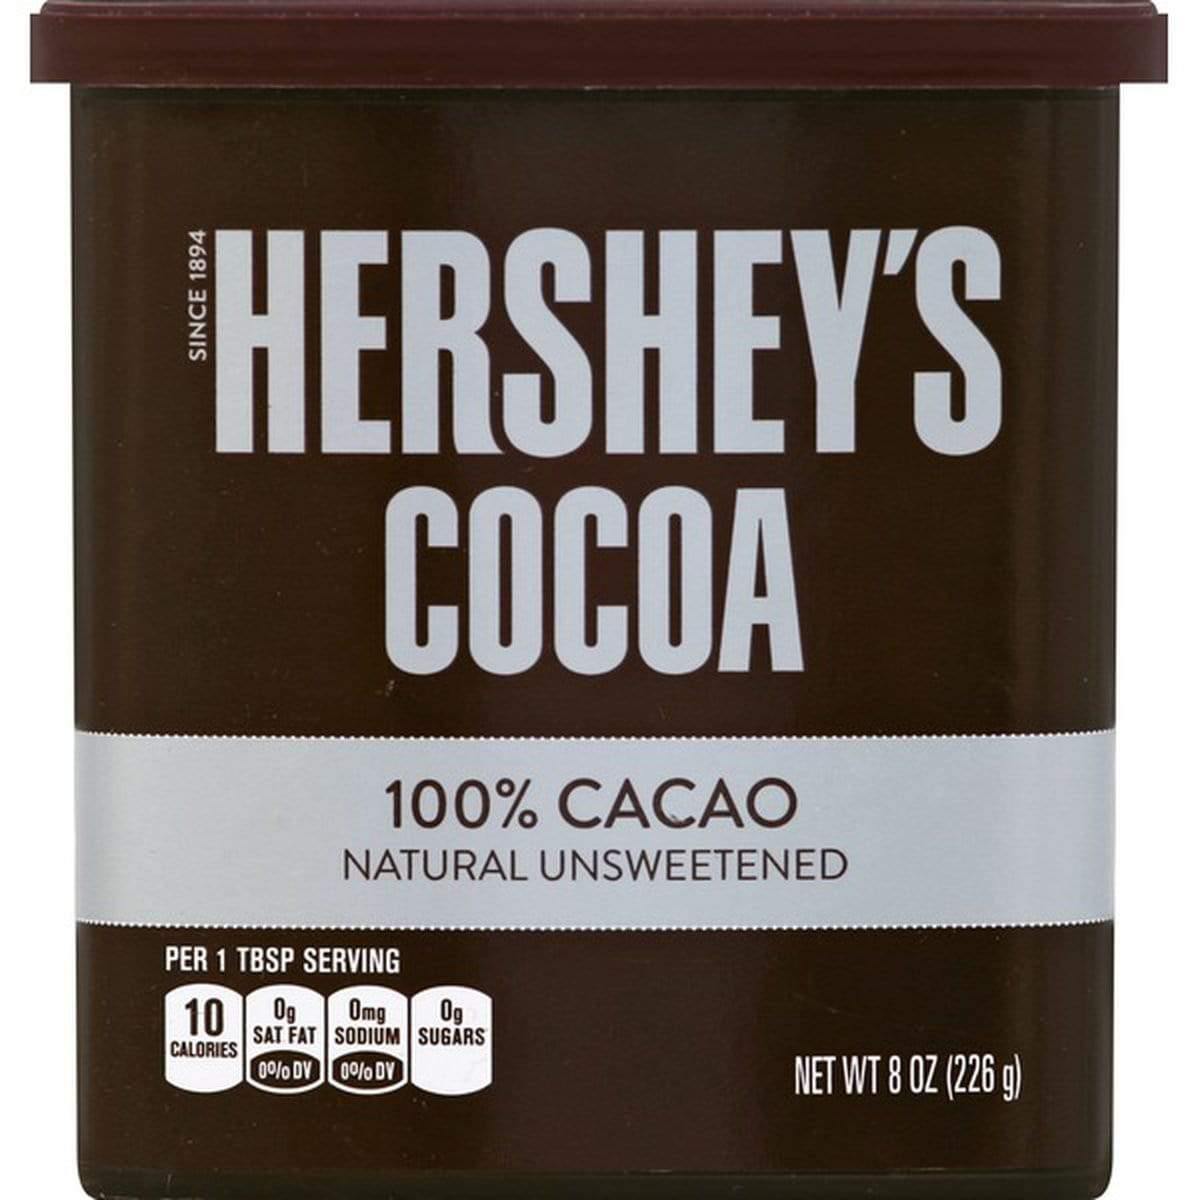 Hershey's. Natural Unsweetened Cocoa